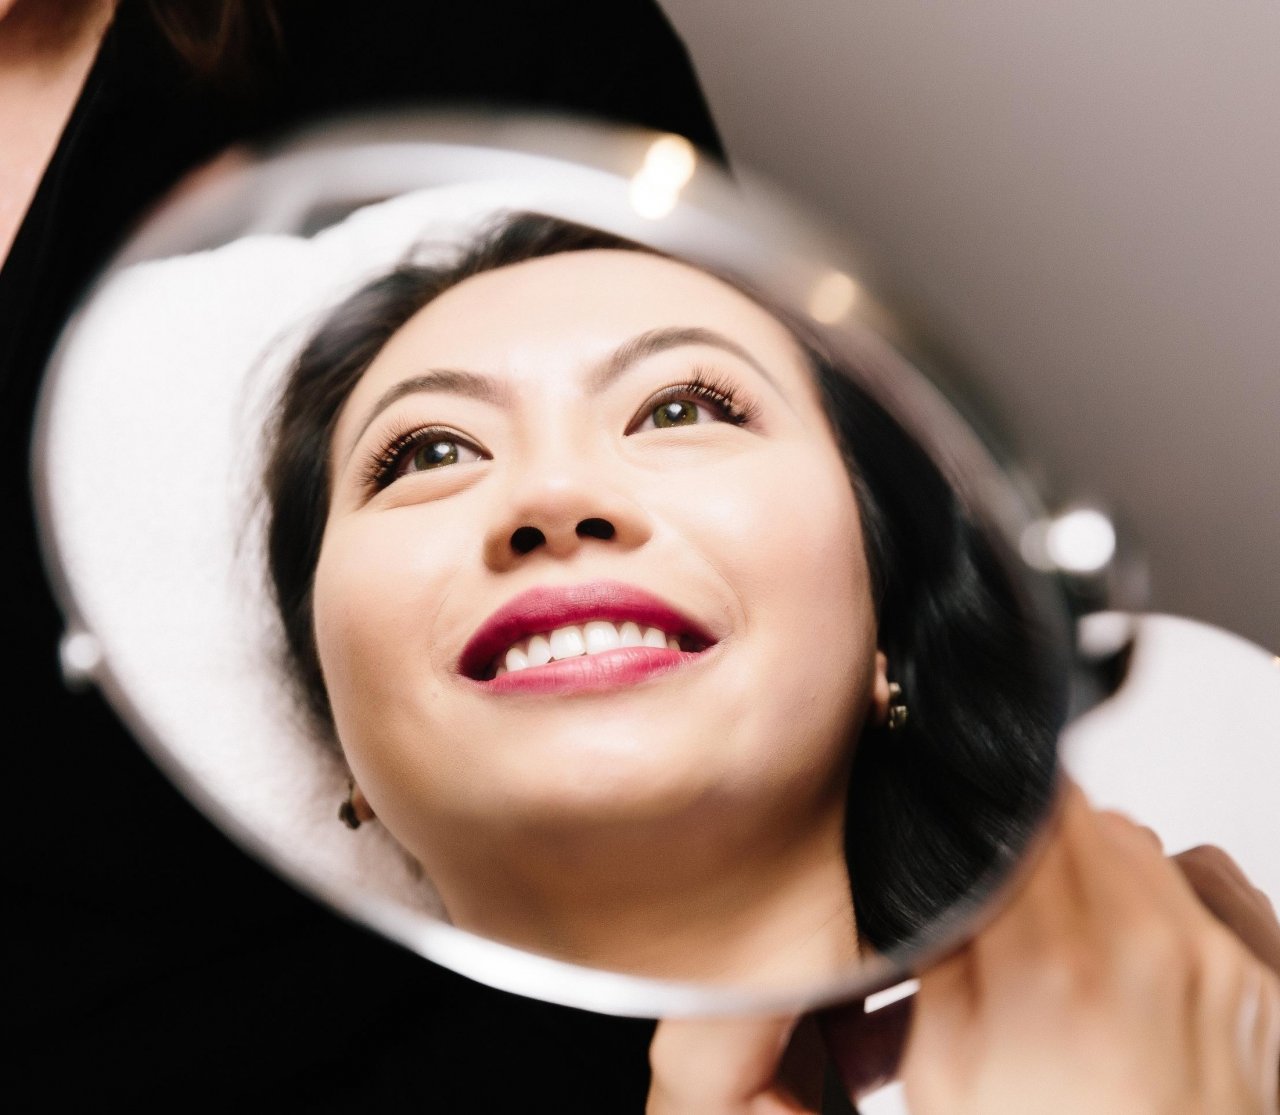 Woman smiling looking at herself in a mirror